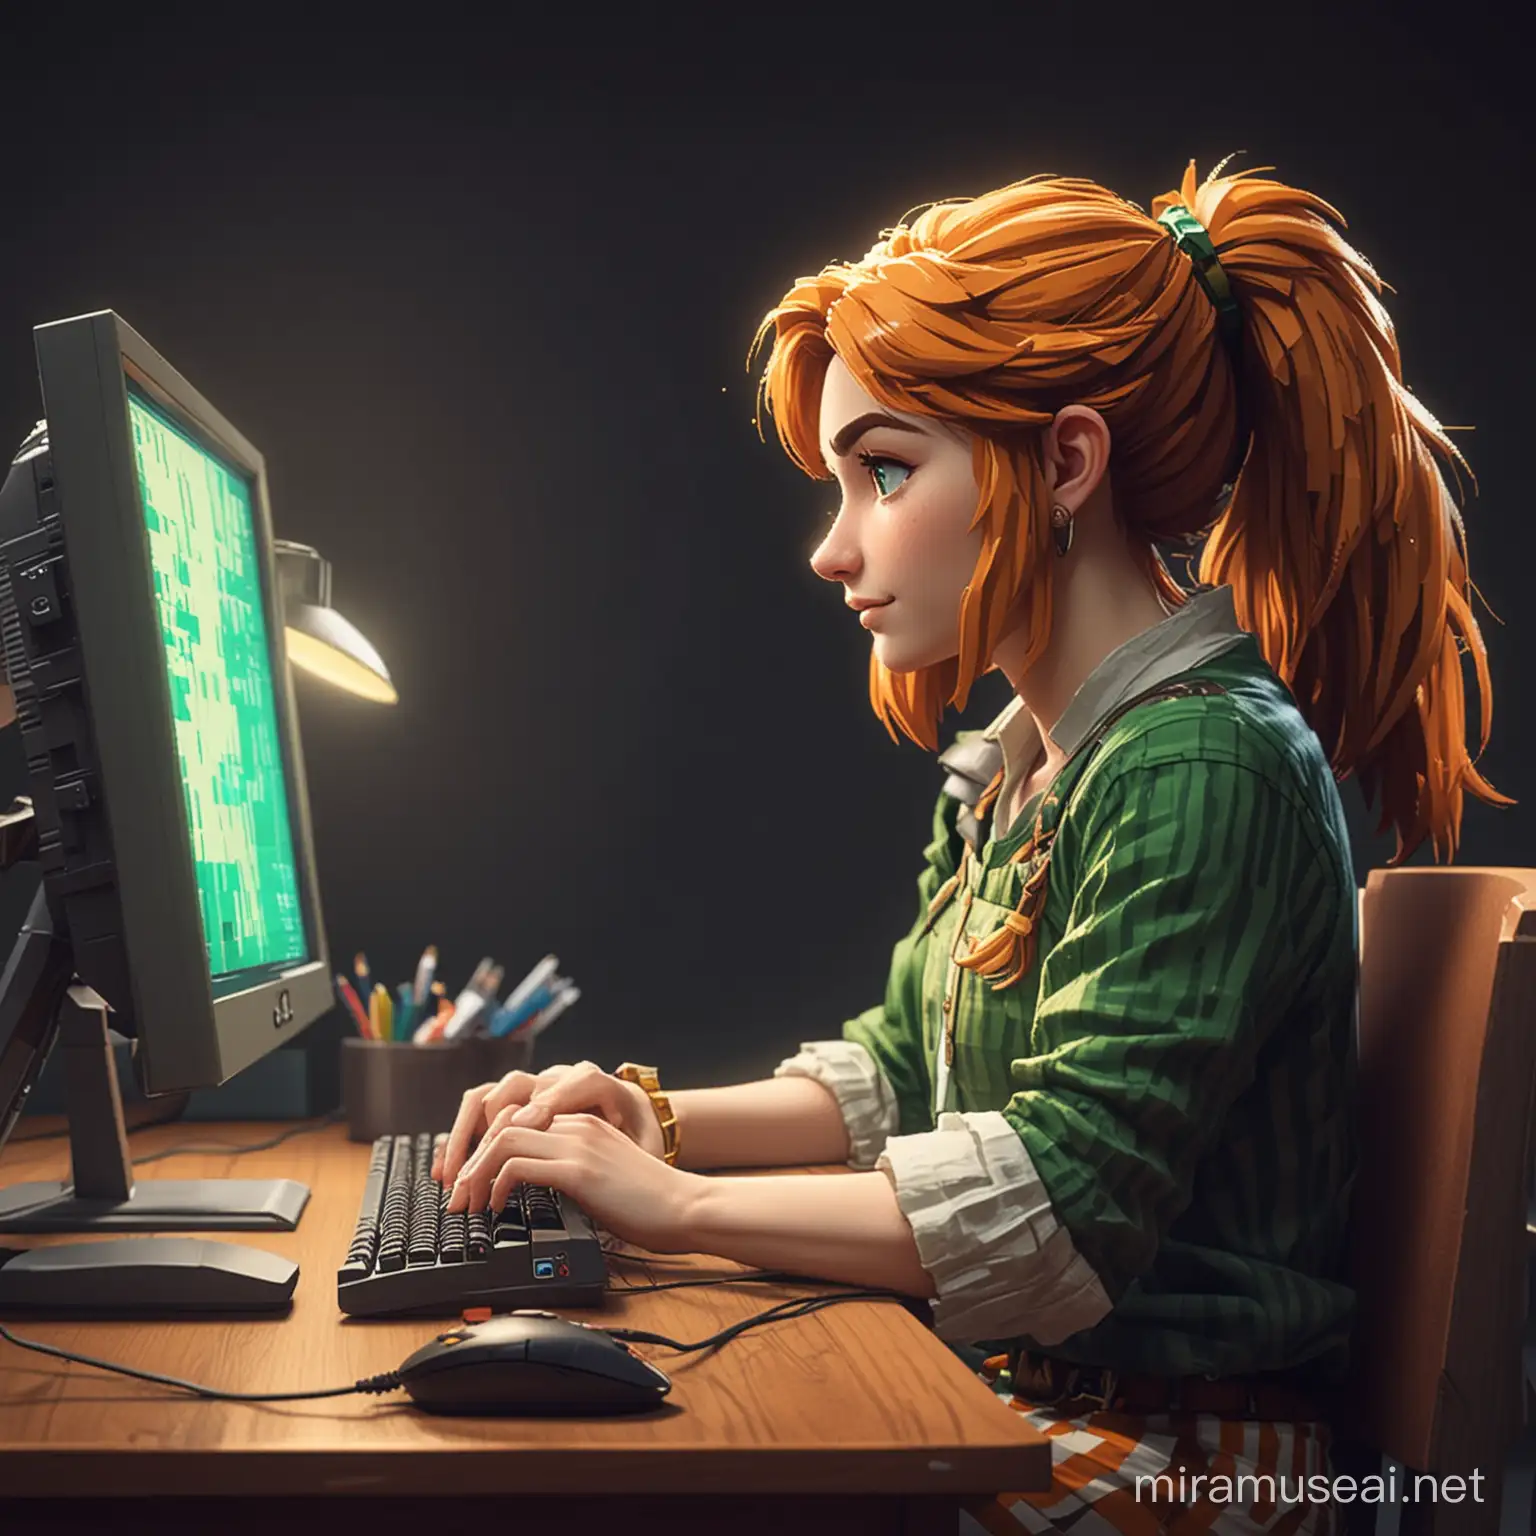 Create a pixel art image of a character seated at a desk, engaged in work on a computer. The character is in a side profile view, showcasing a relaxed posture with one hand on the mouse and the other on the keyboard. They are dressed in casual attire: a striped green and white shirt, orange pants, and they have a light-colored beard. The desk should have a simple design, supporting a blocky, pixel-style computer monitor. The background is dark to highlight the scene, 
, perhaps with the ambient glow of the screen illuminating the character's face." With zelda theme